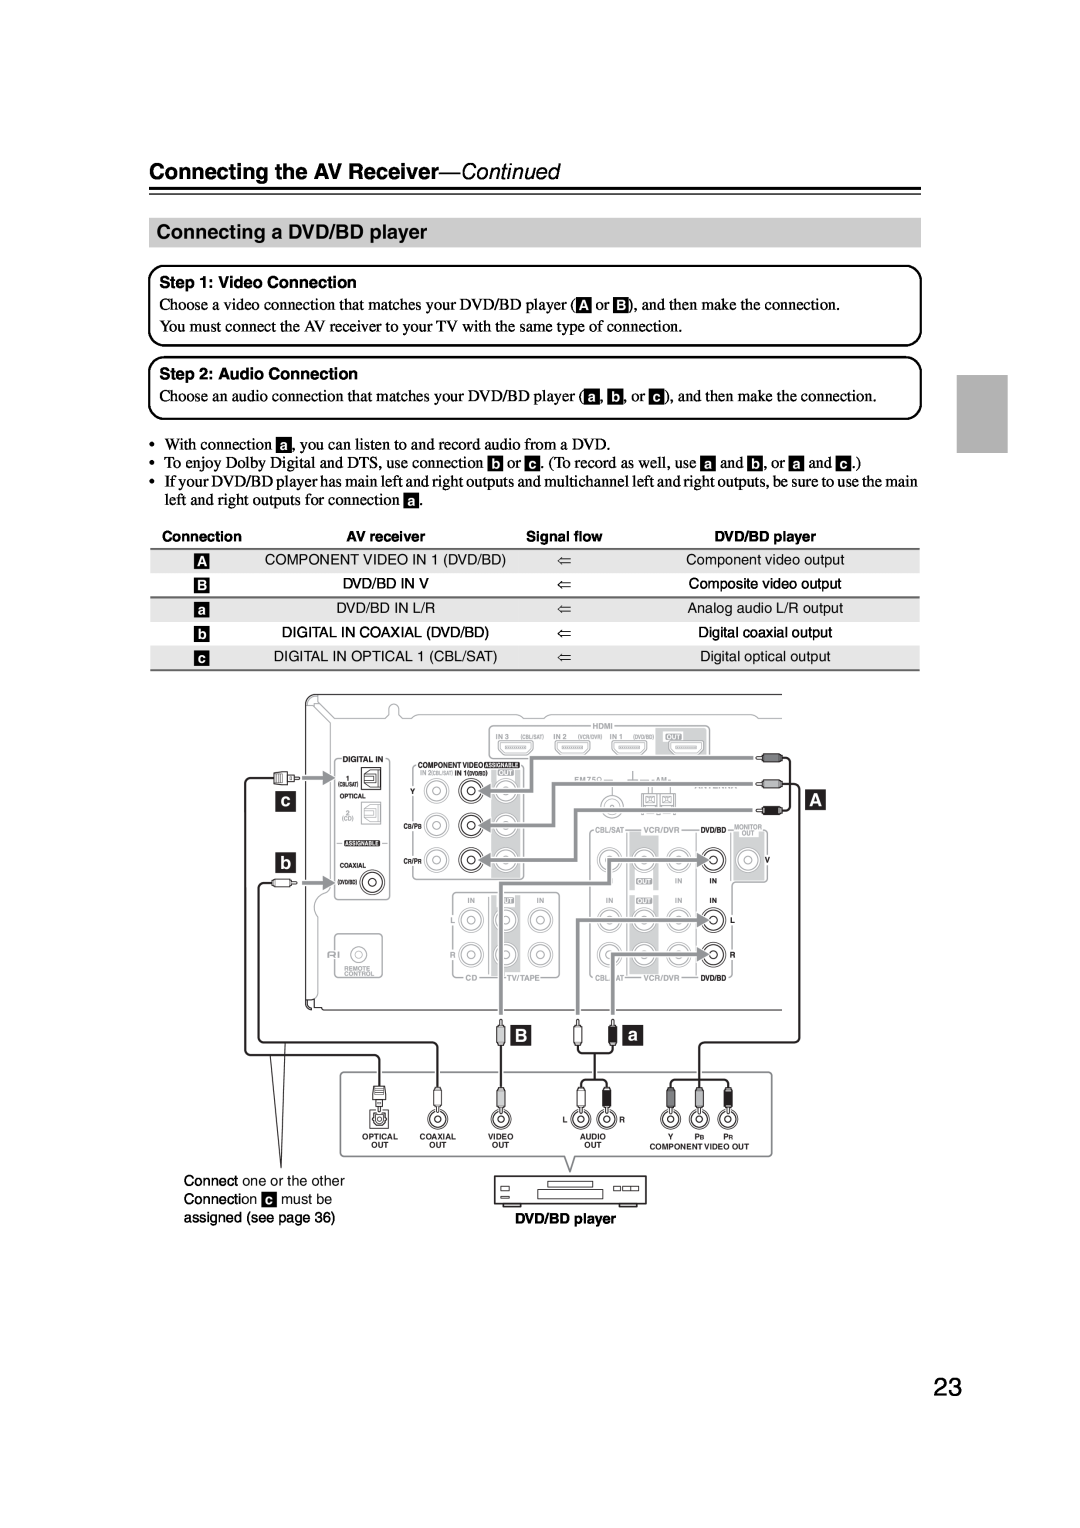 Onkyo TXSR307 instruction manual Connecting a DVD/BD player, Connecting the AV Receiver-Continued 